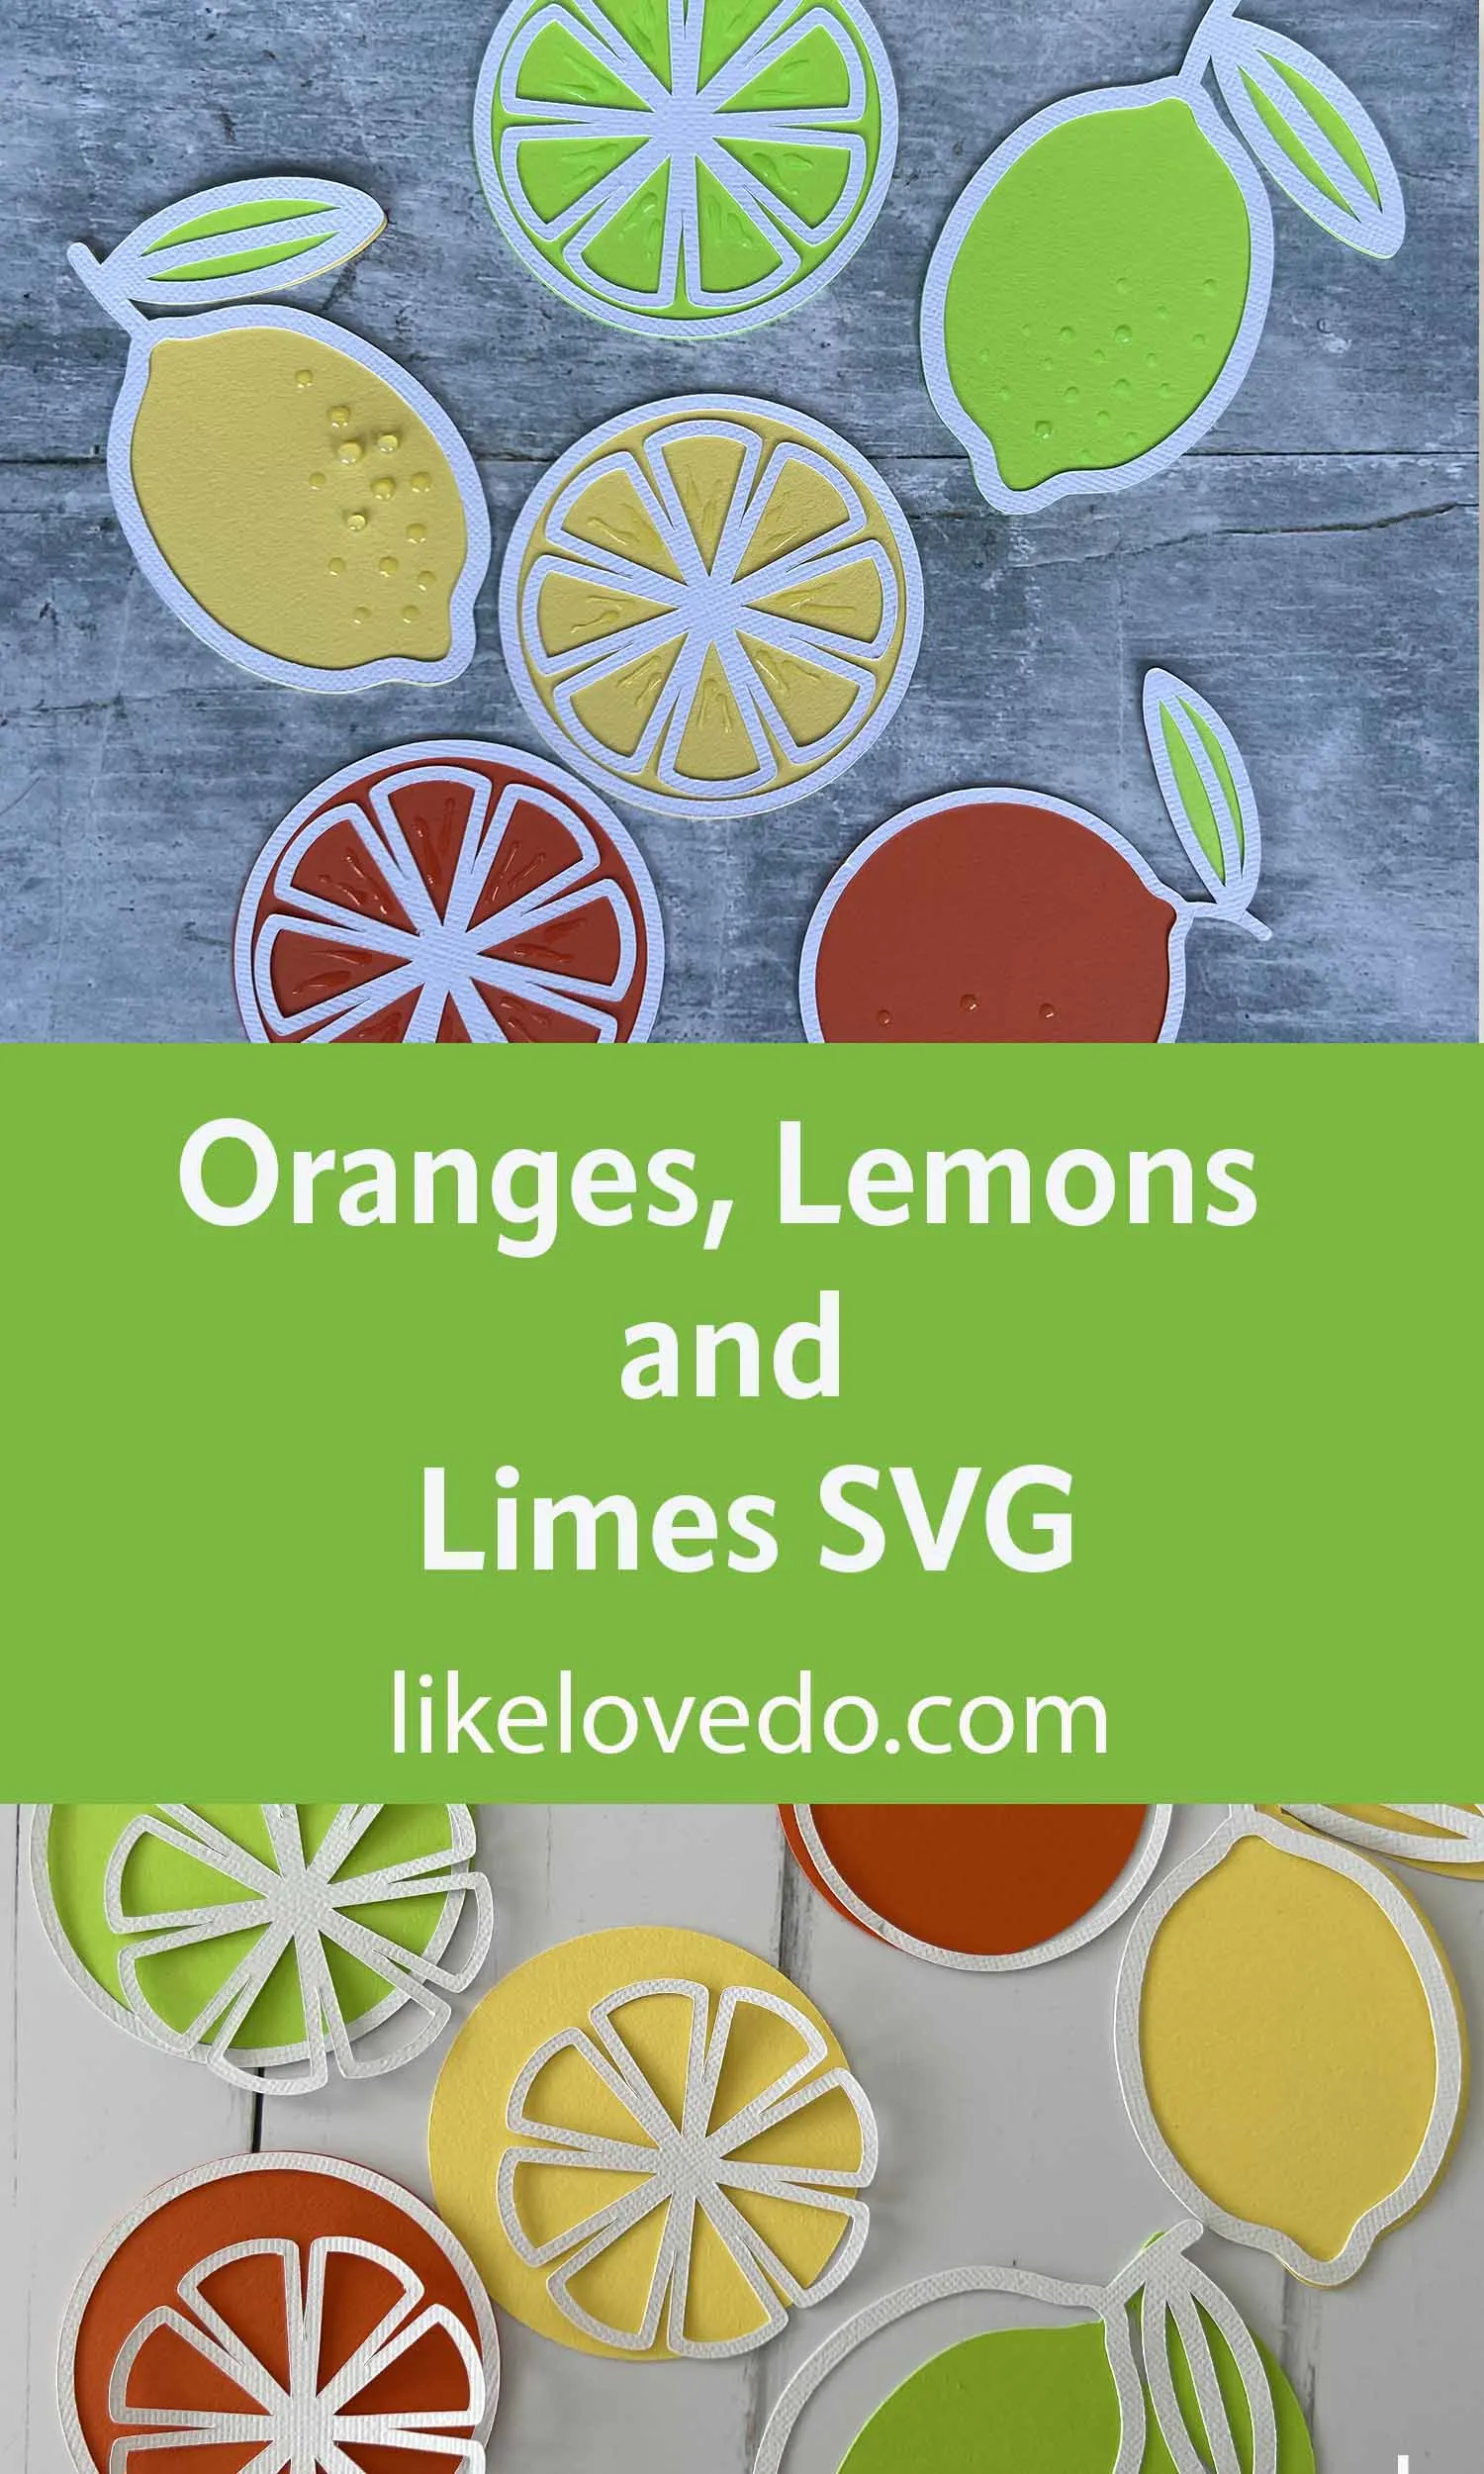 Layered Citrus Fruits SVGS